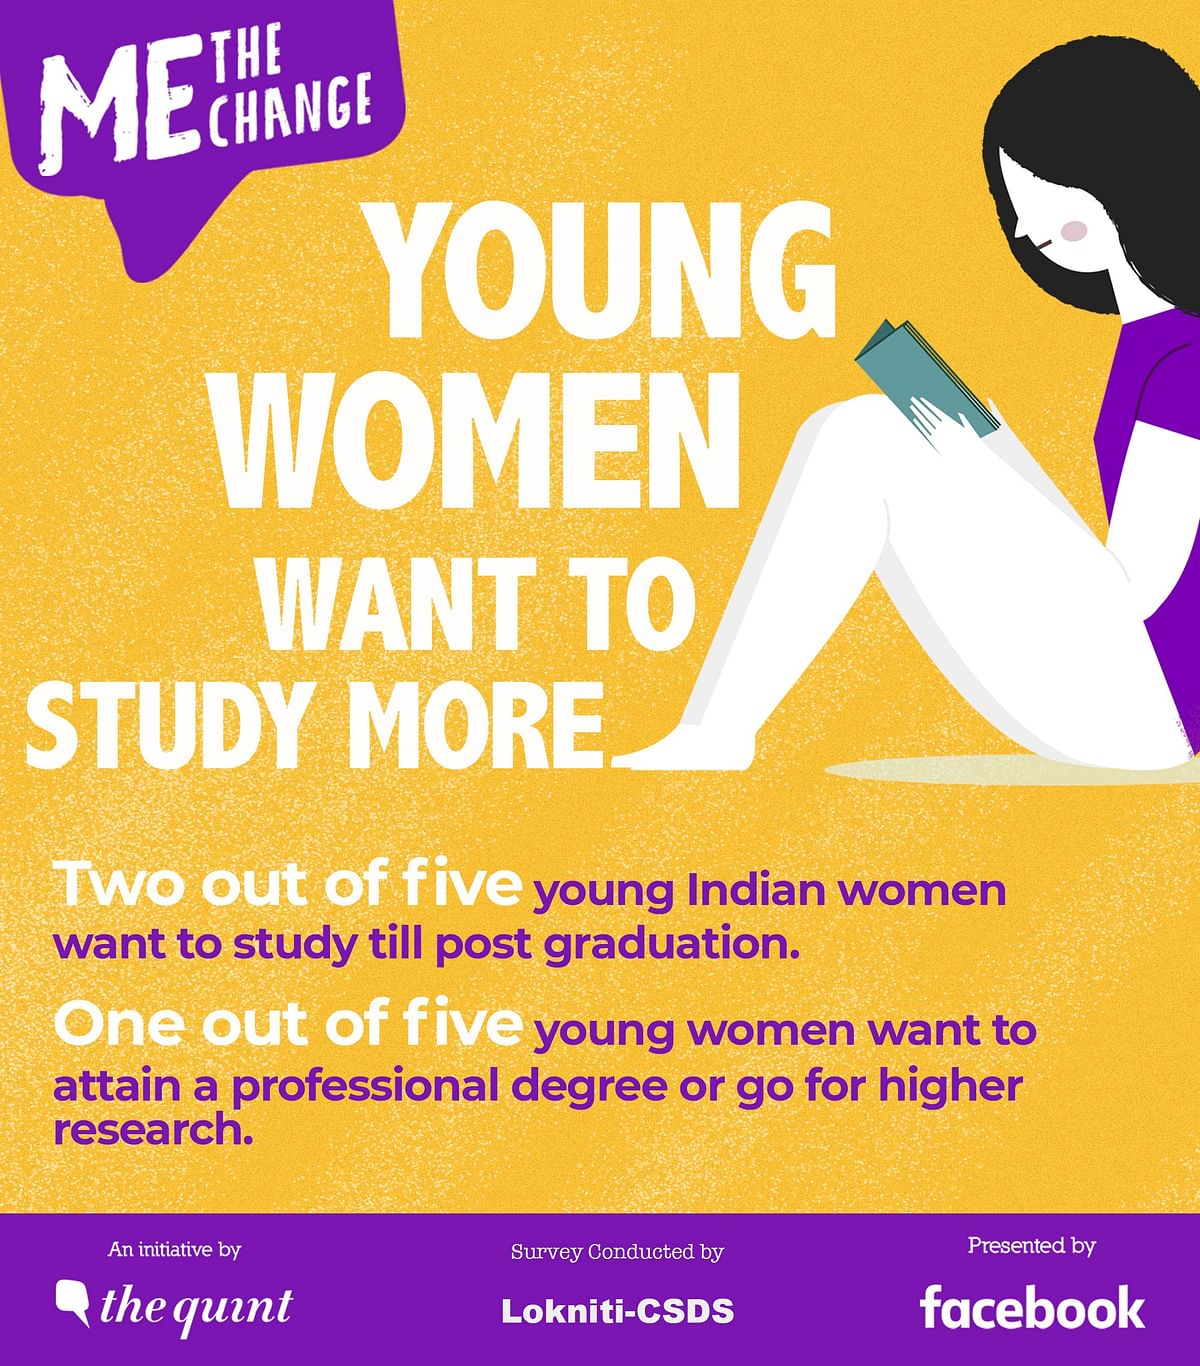 According to the Lokniti-CSDS The Quint survey, India’s young women have high aspirations with regard to education. 